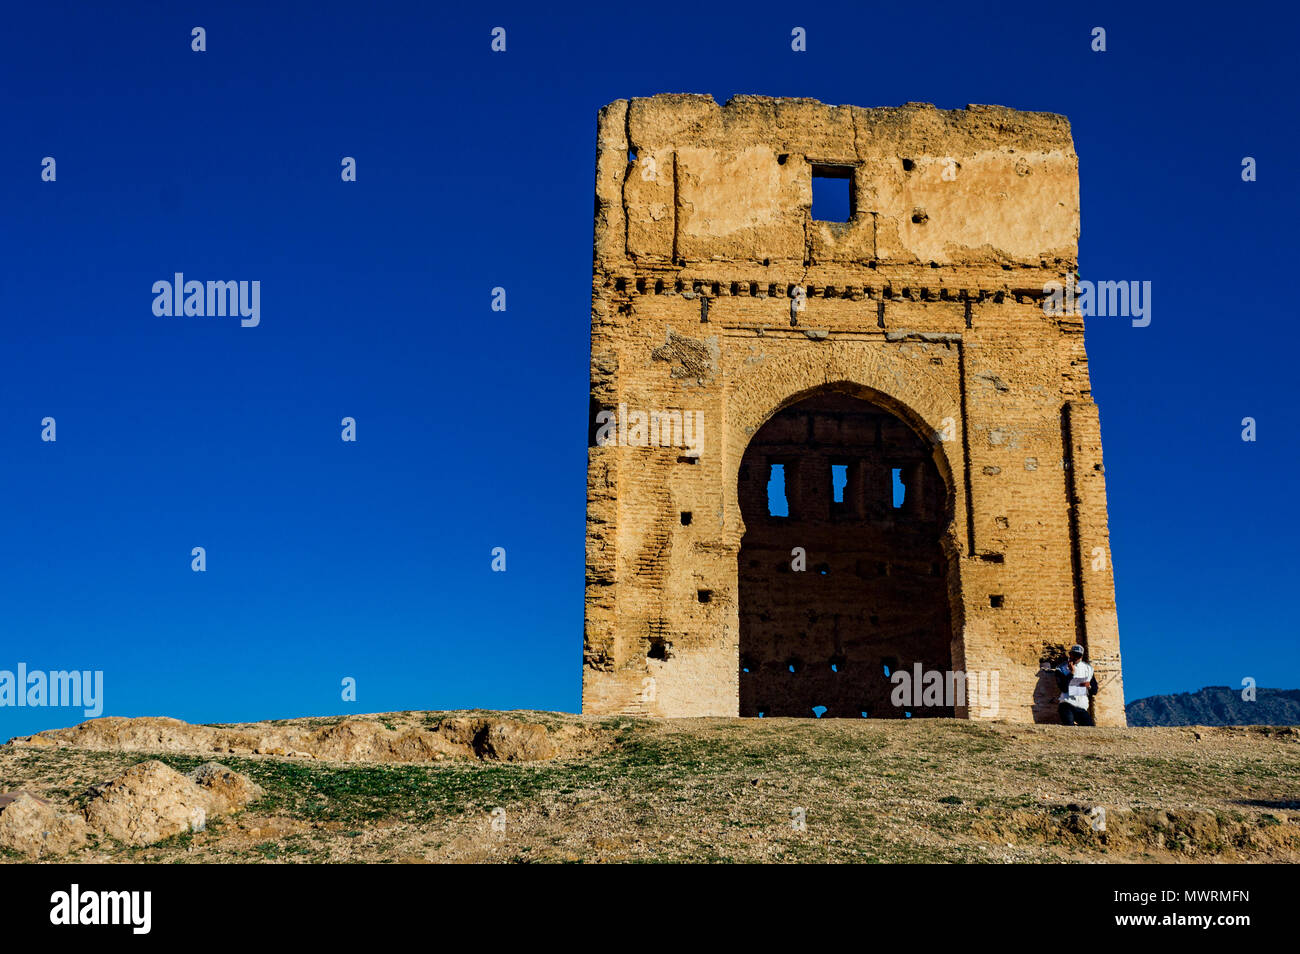 Merenid Tombs at the highest point in Fez Stock Photo